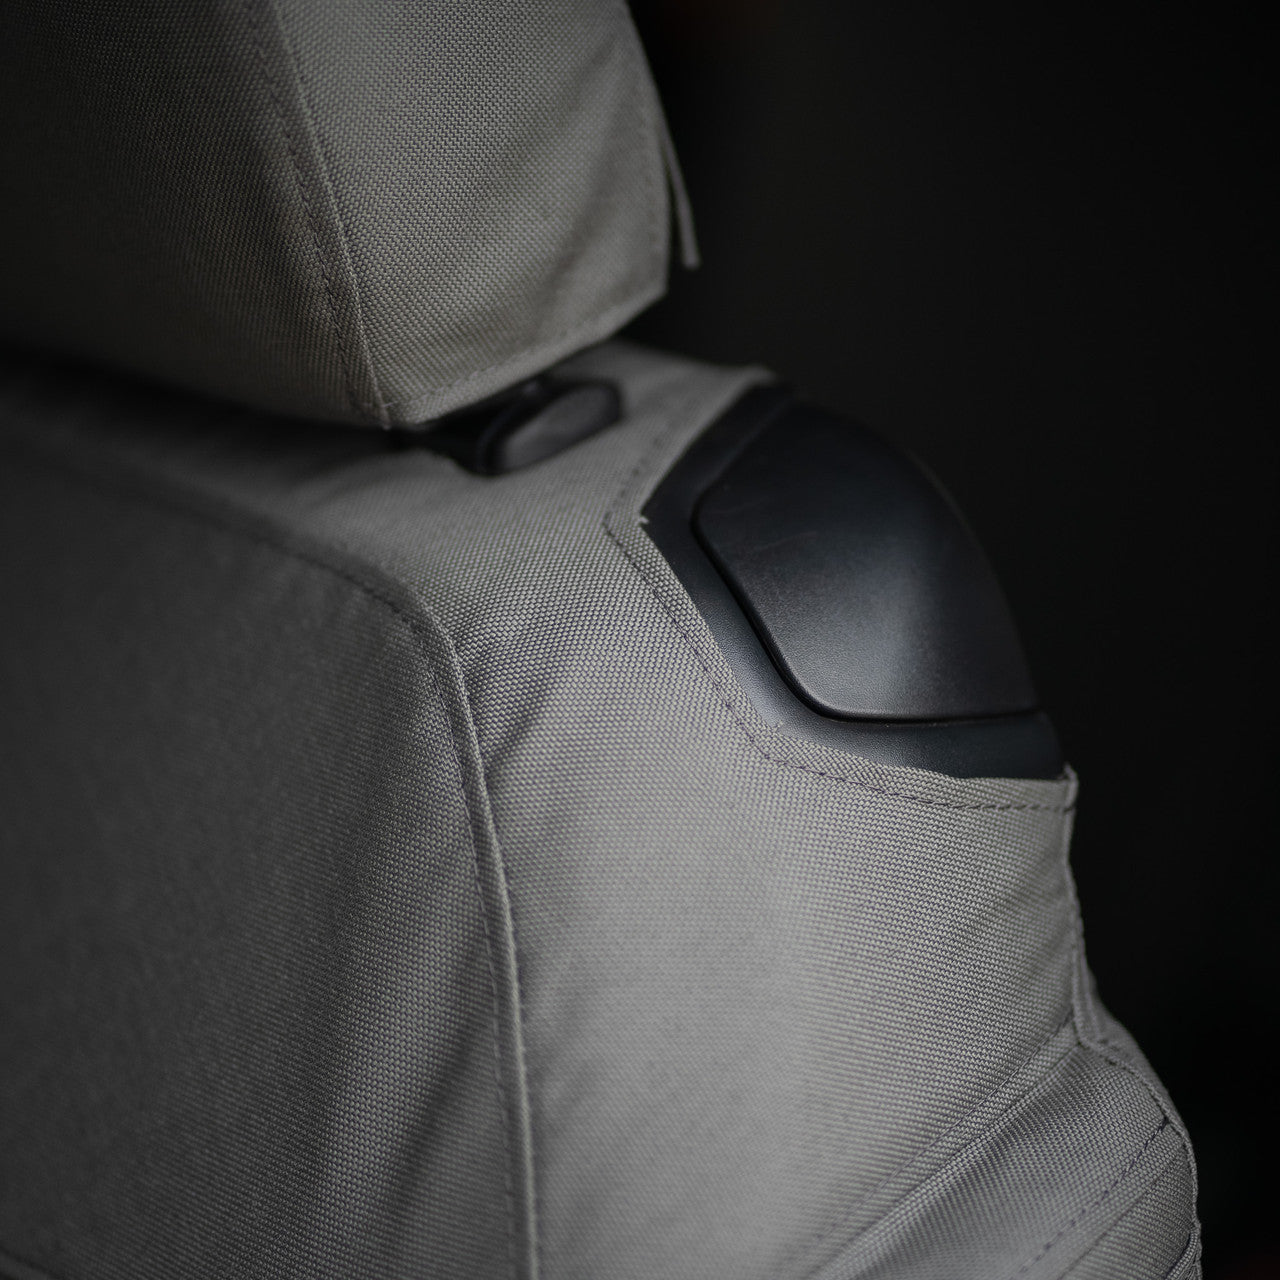 This cover allows access to the handle on the corner of the seat so that you can easily fold your seat forward